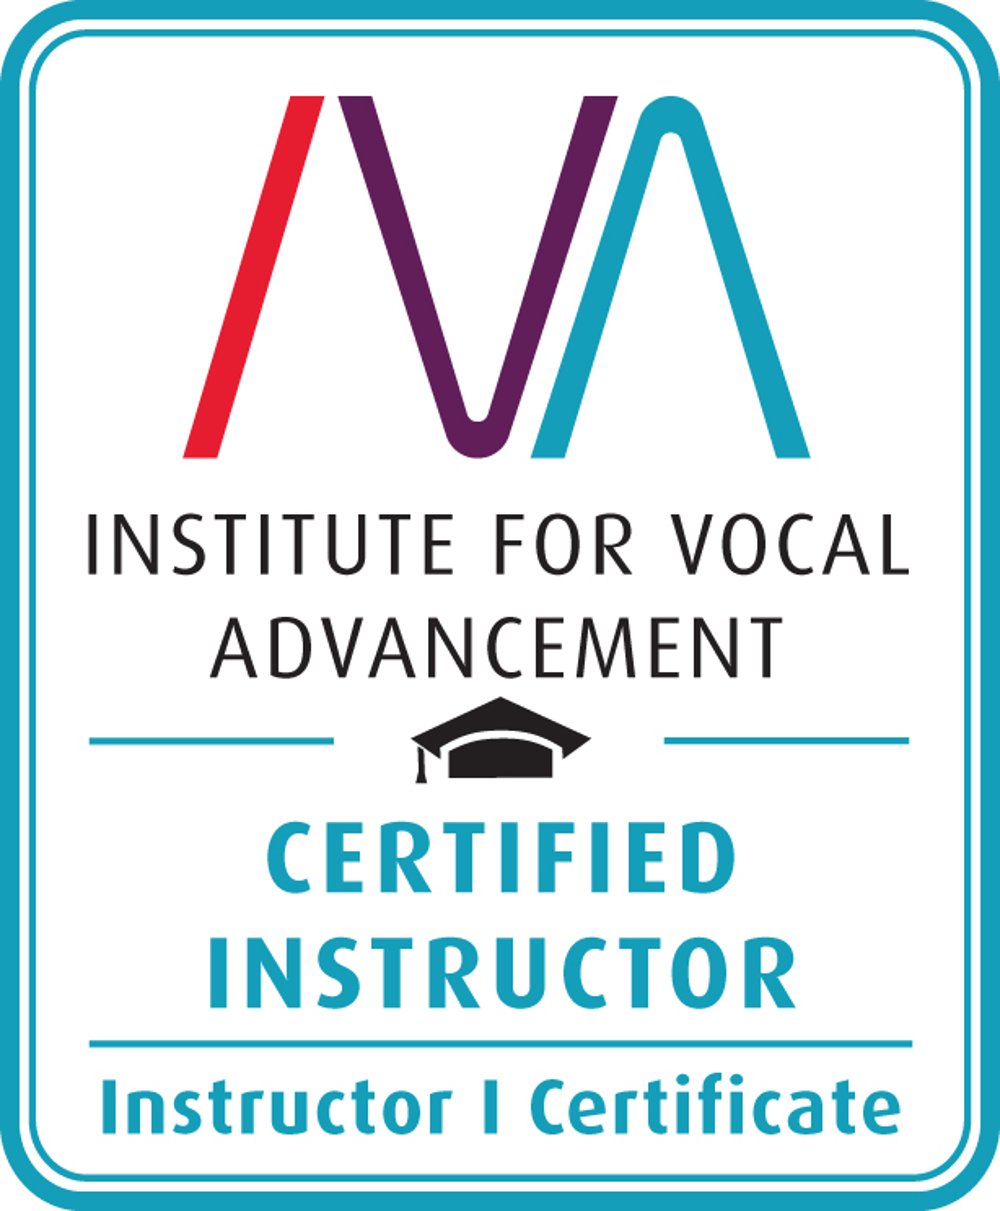 Certification plaque for level I voice teaching